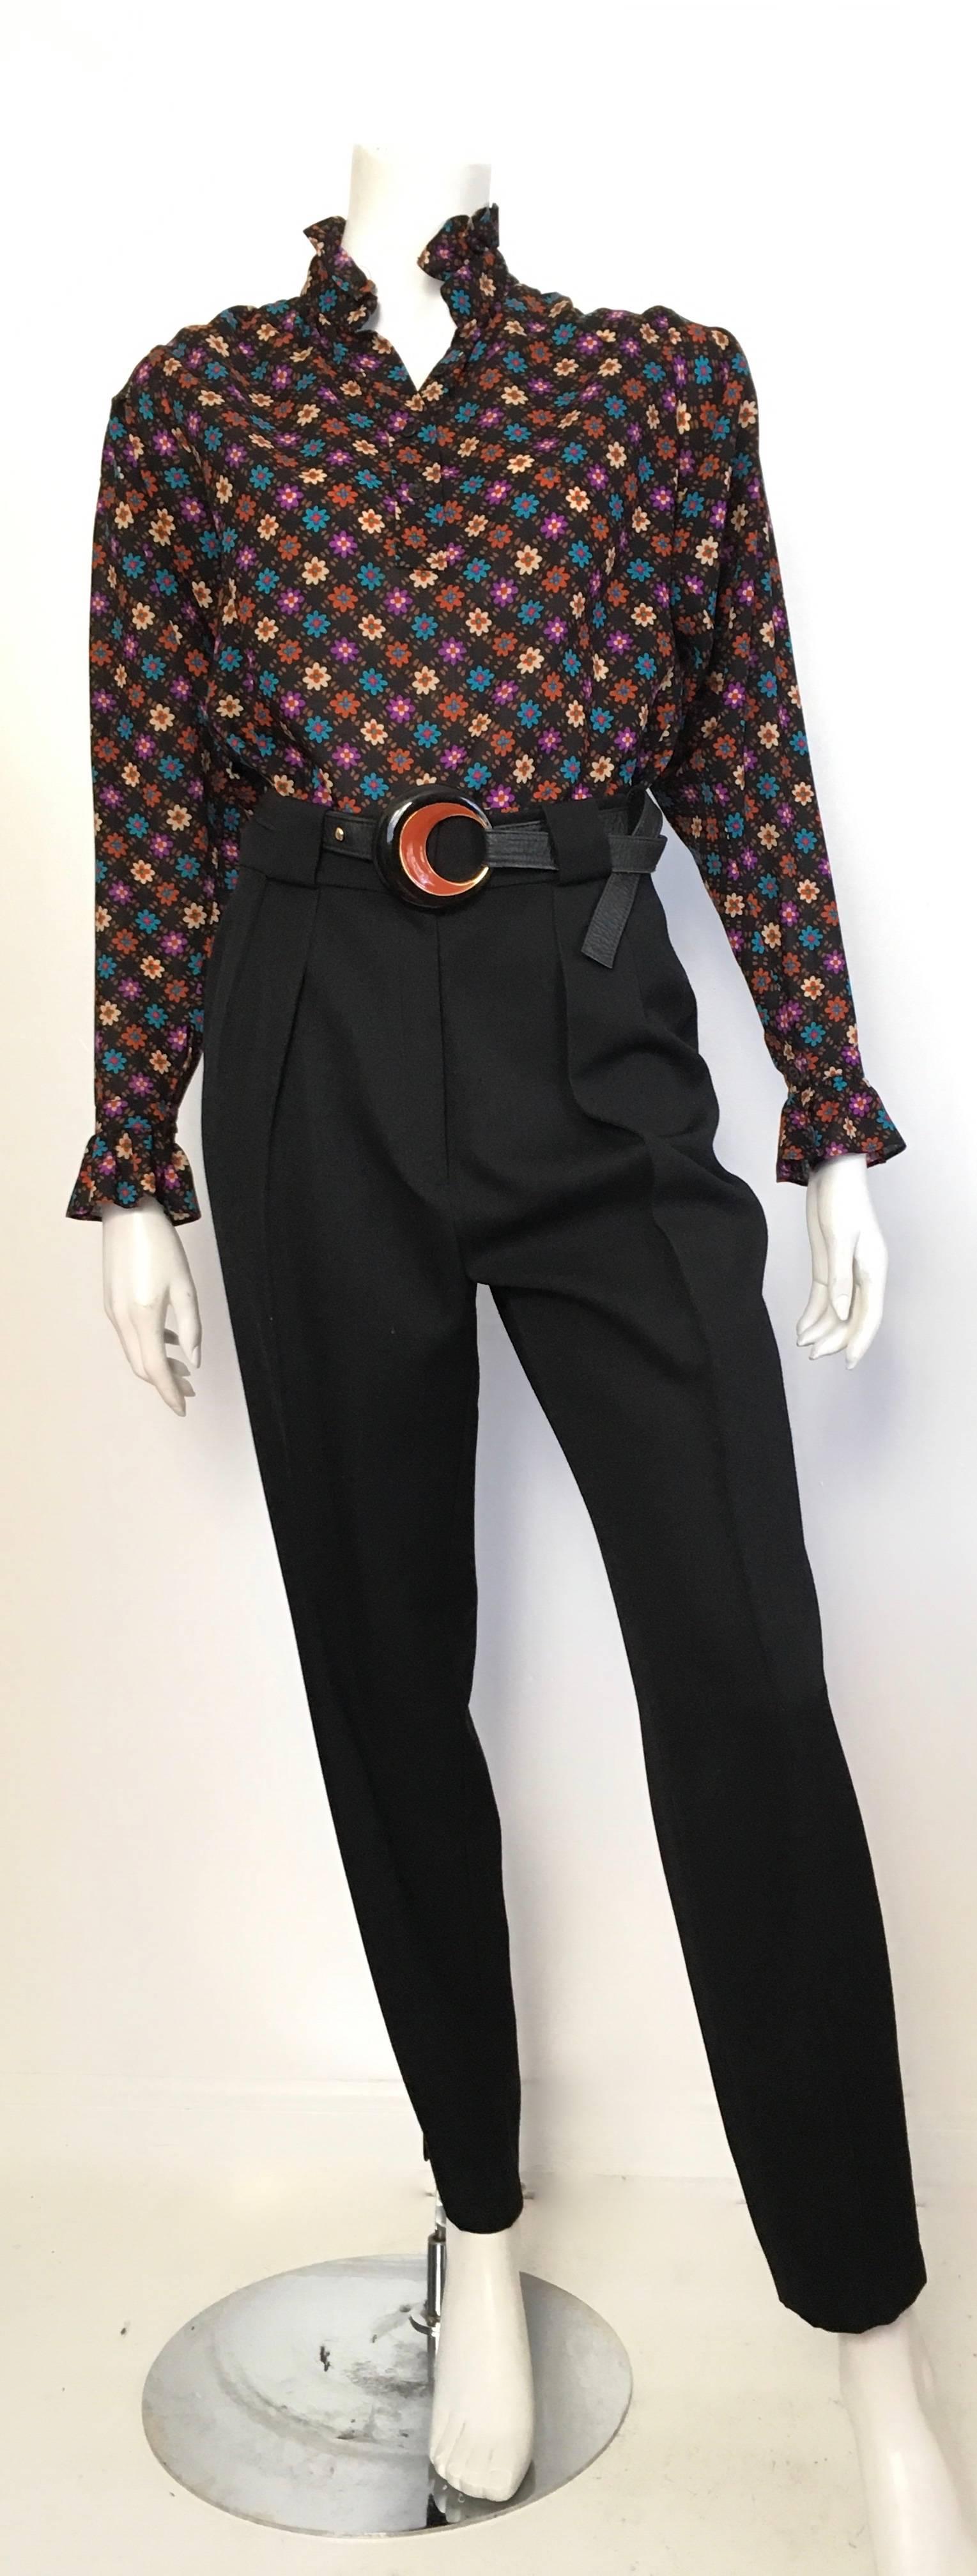 Karl Lagerfeld 1980s black pleated wool pants are a French size 40 and fits an USA size 4/6.  Ladies please grab your tape measure so you can measure your waist & hips to make sure these Lagerfeld pants will fit your body to perfection.  Pants do